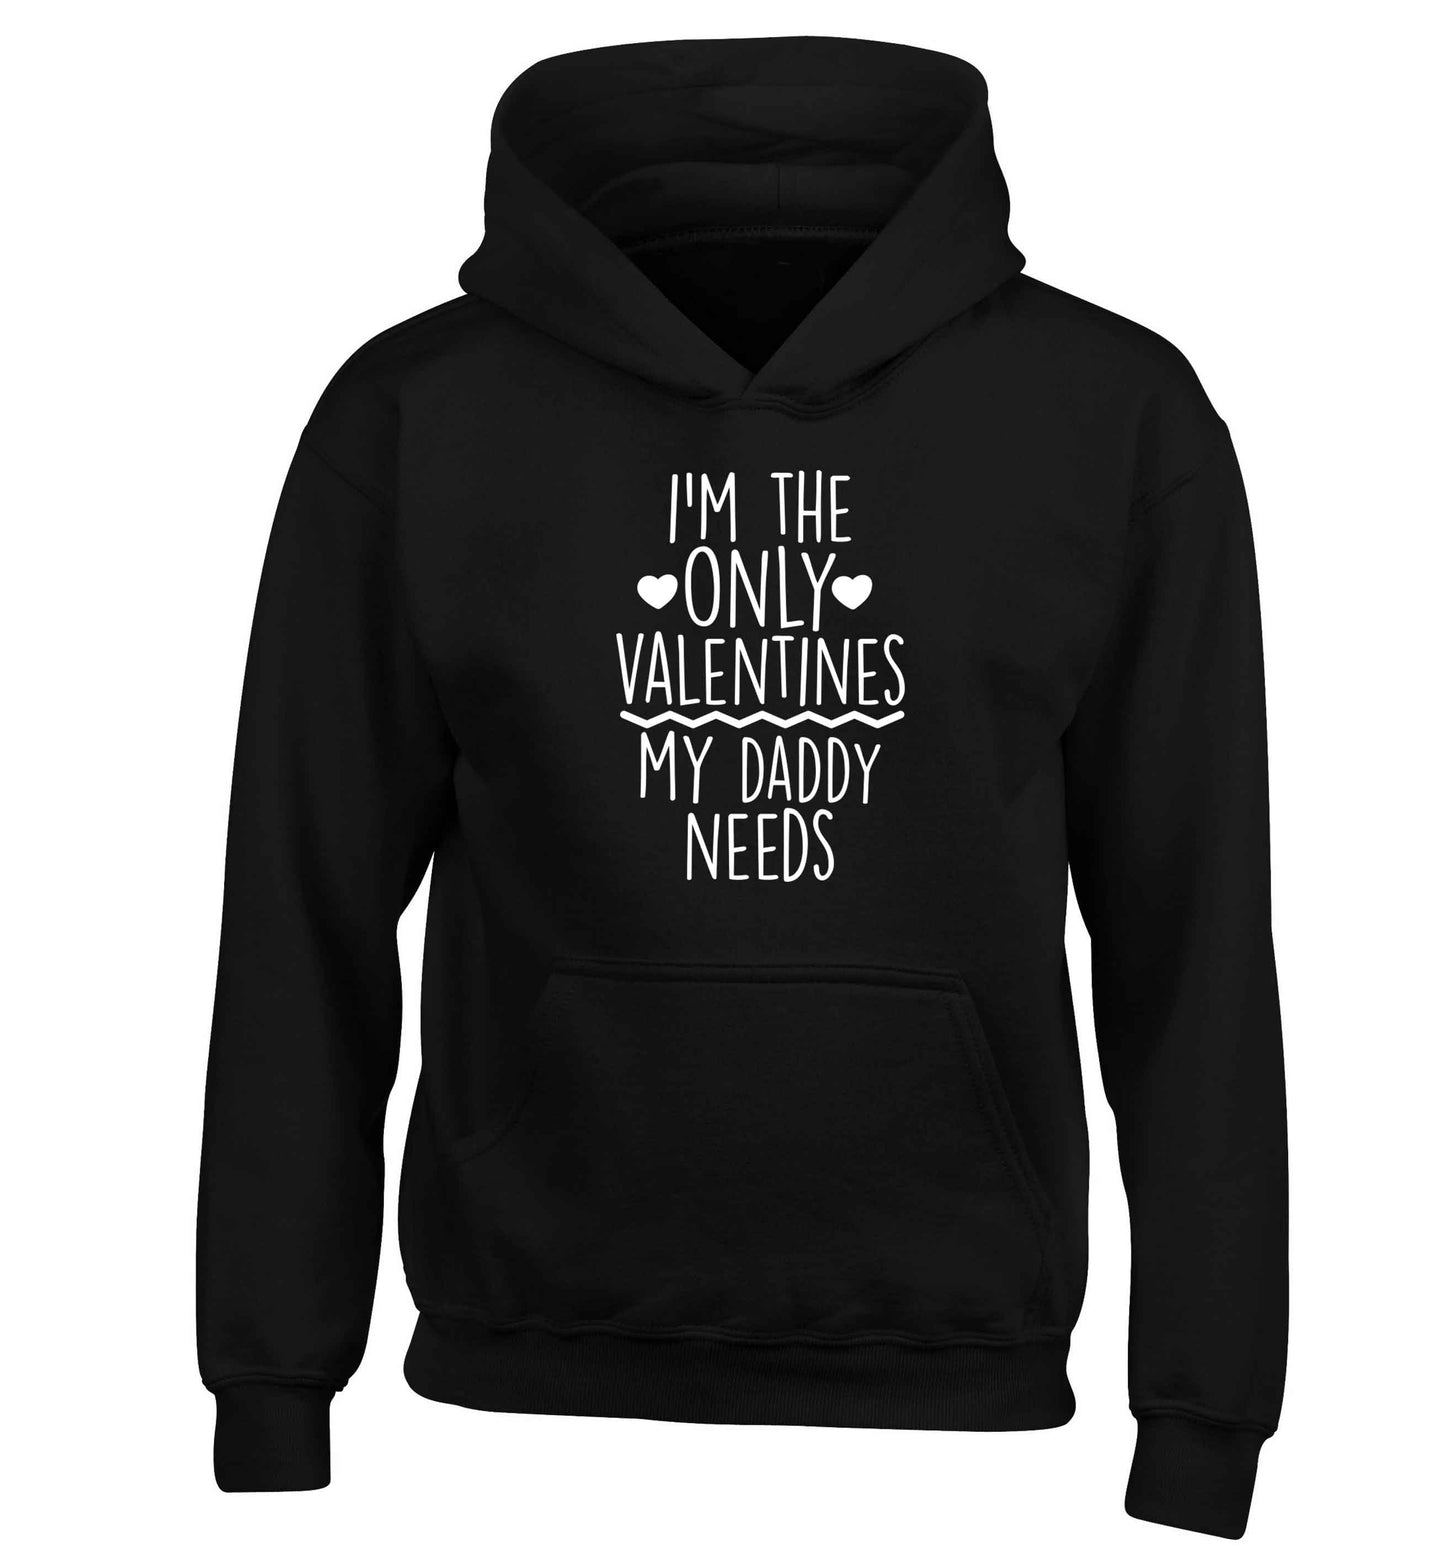 I'm the only valentines my daddy needs children's black hoodie 12-13 Years